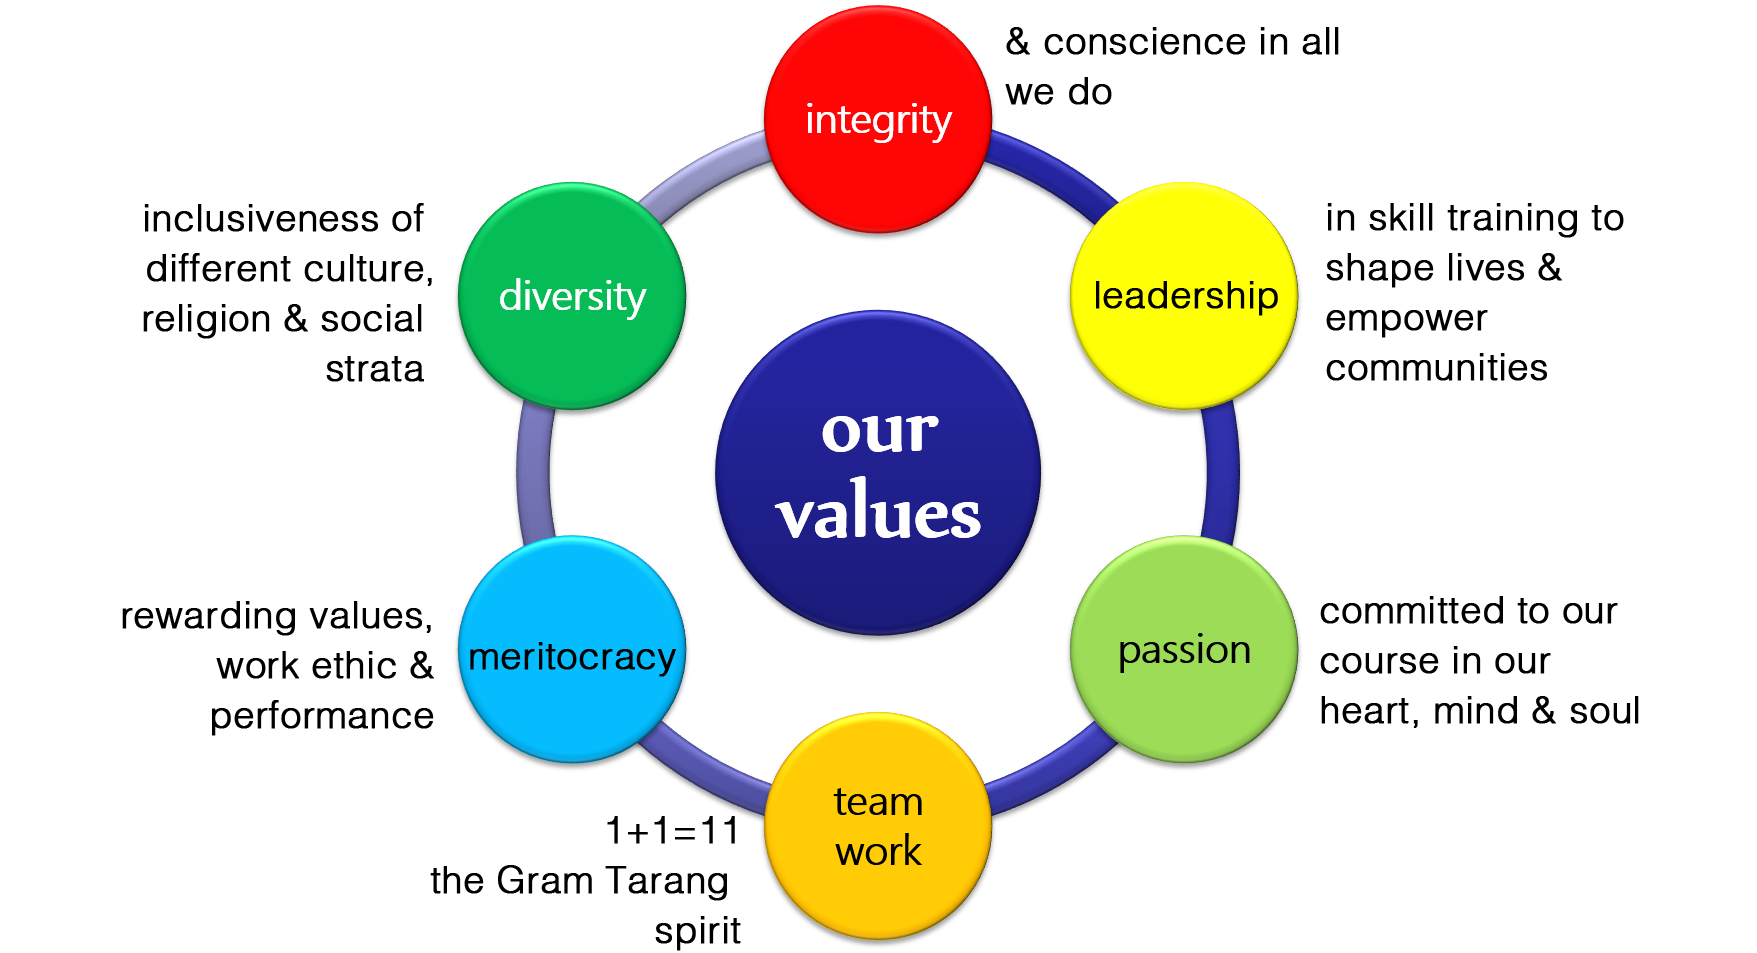 Values yes values. Cultural values. Our values. Value в искусстве. Kinds of values.